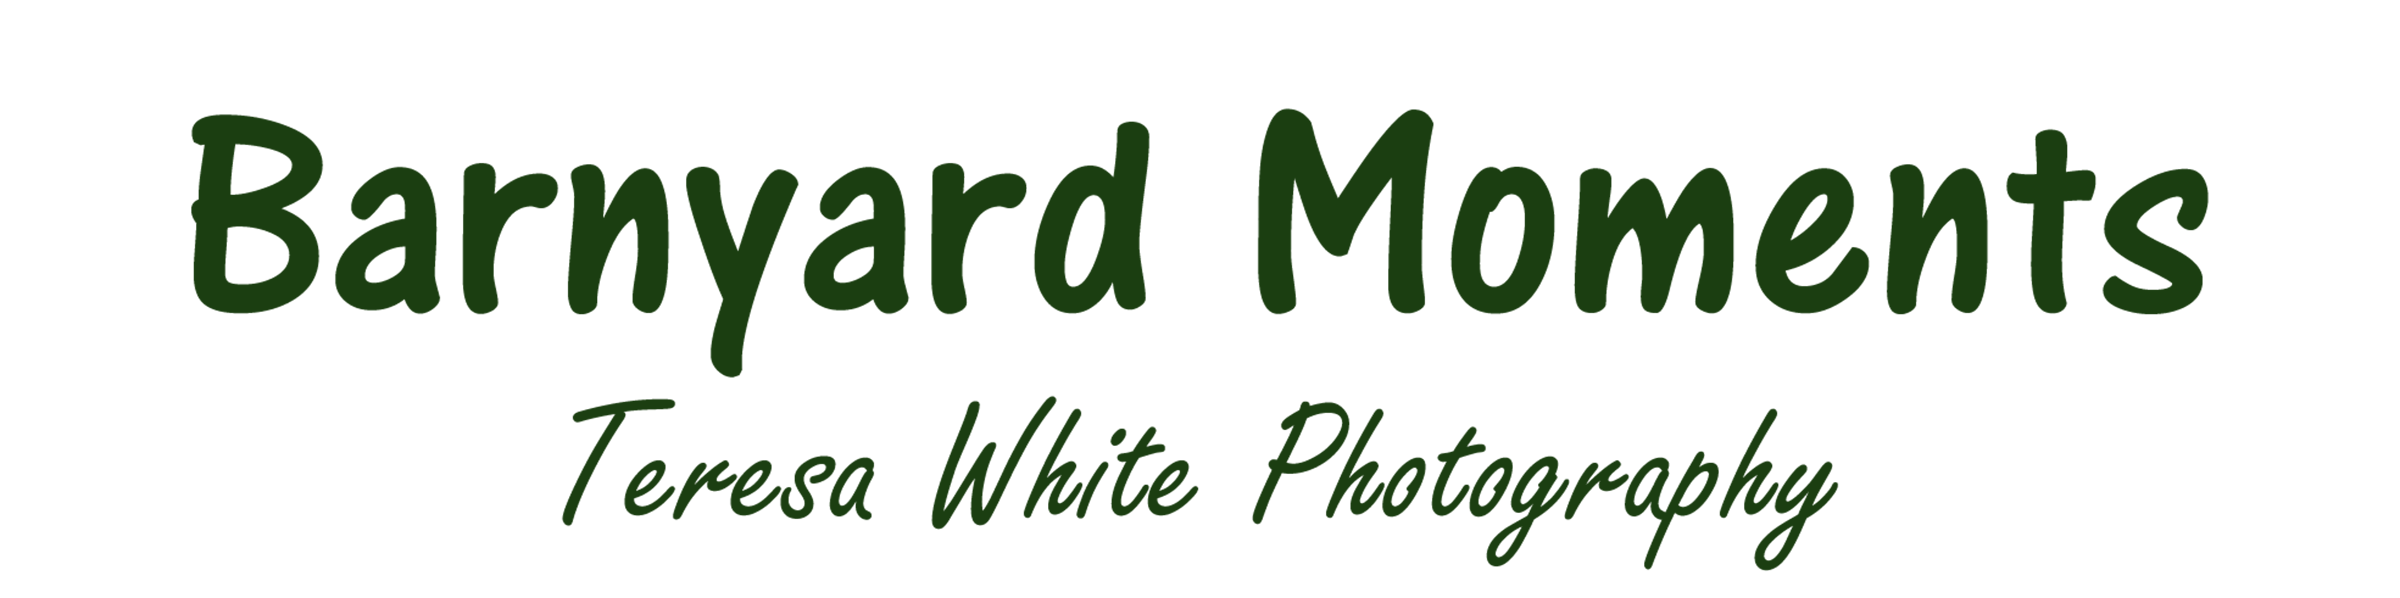 Farm Animal Photography & Greeting Cards for Sale in NJ | Barnyard Moments